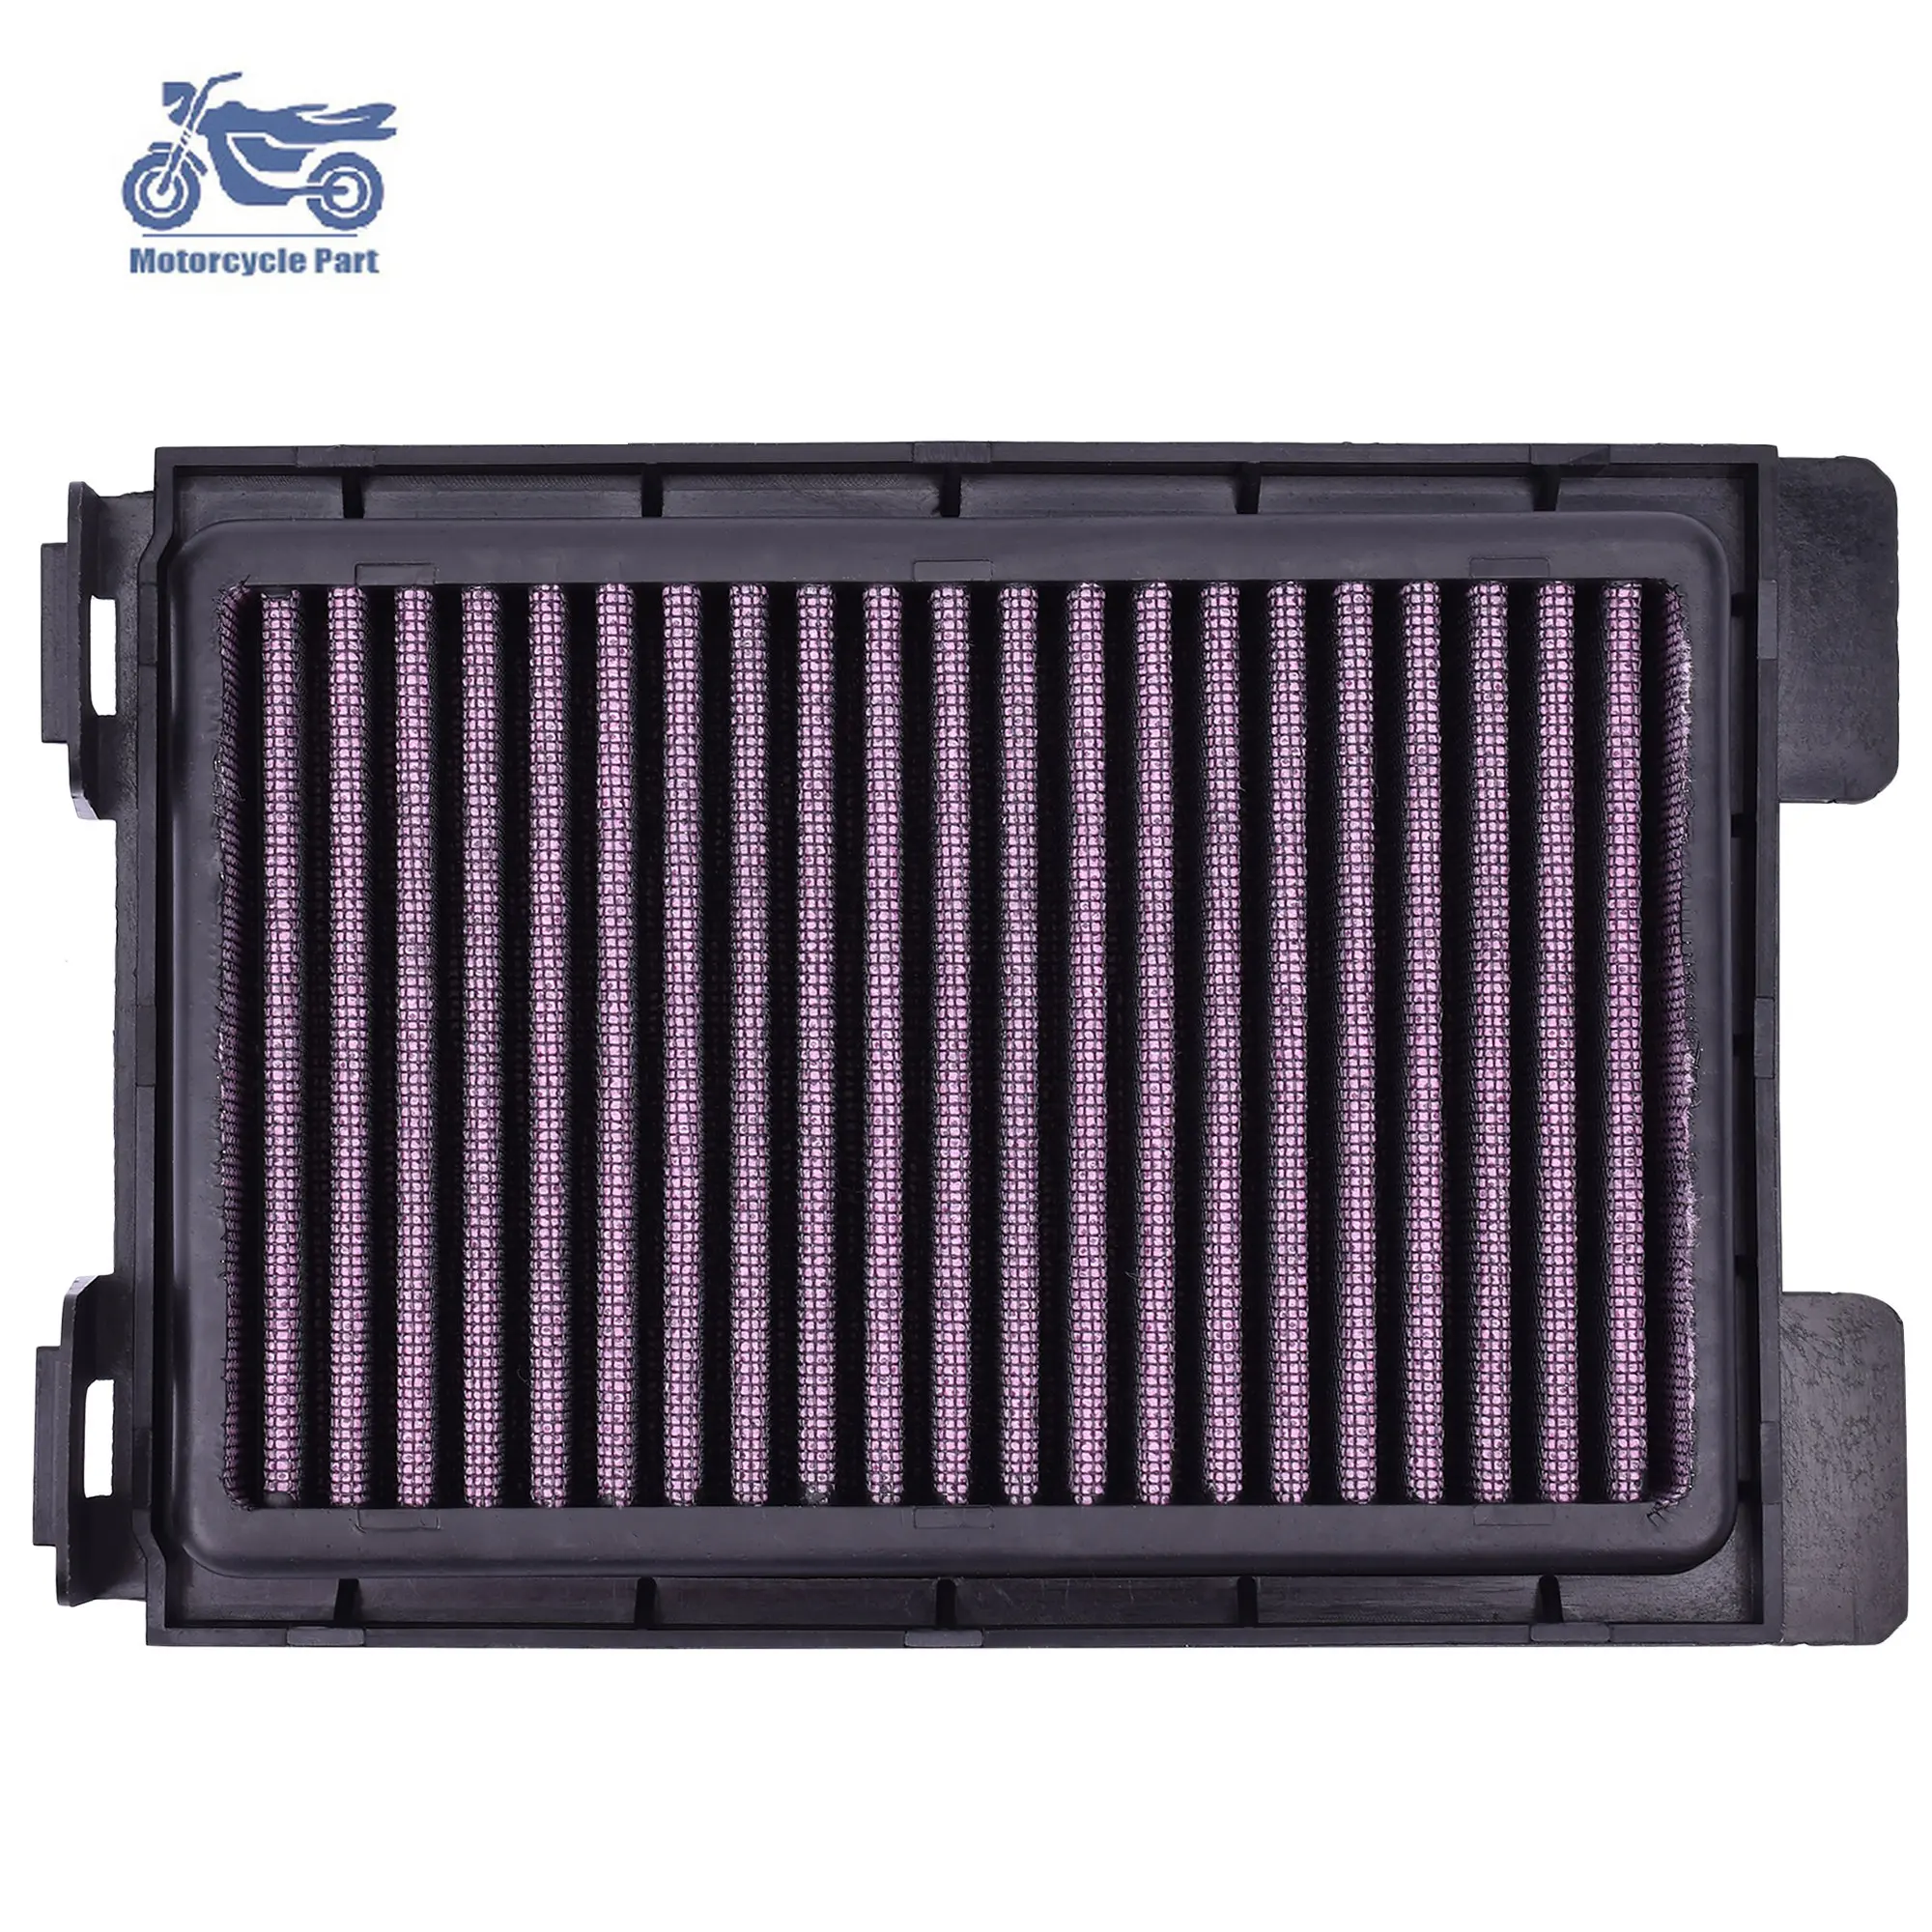 

Motor Parts Intake Air Filter Cleaner For Honda CBR250 CBR250R ABS CBR 250 CB 300 CB300F CB300 CBR300 CBR300R ABS 2015-2020